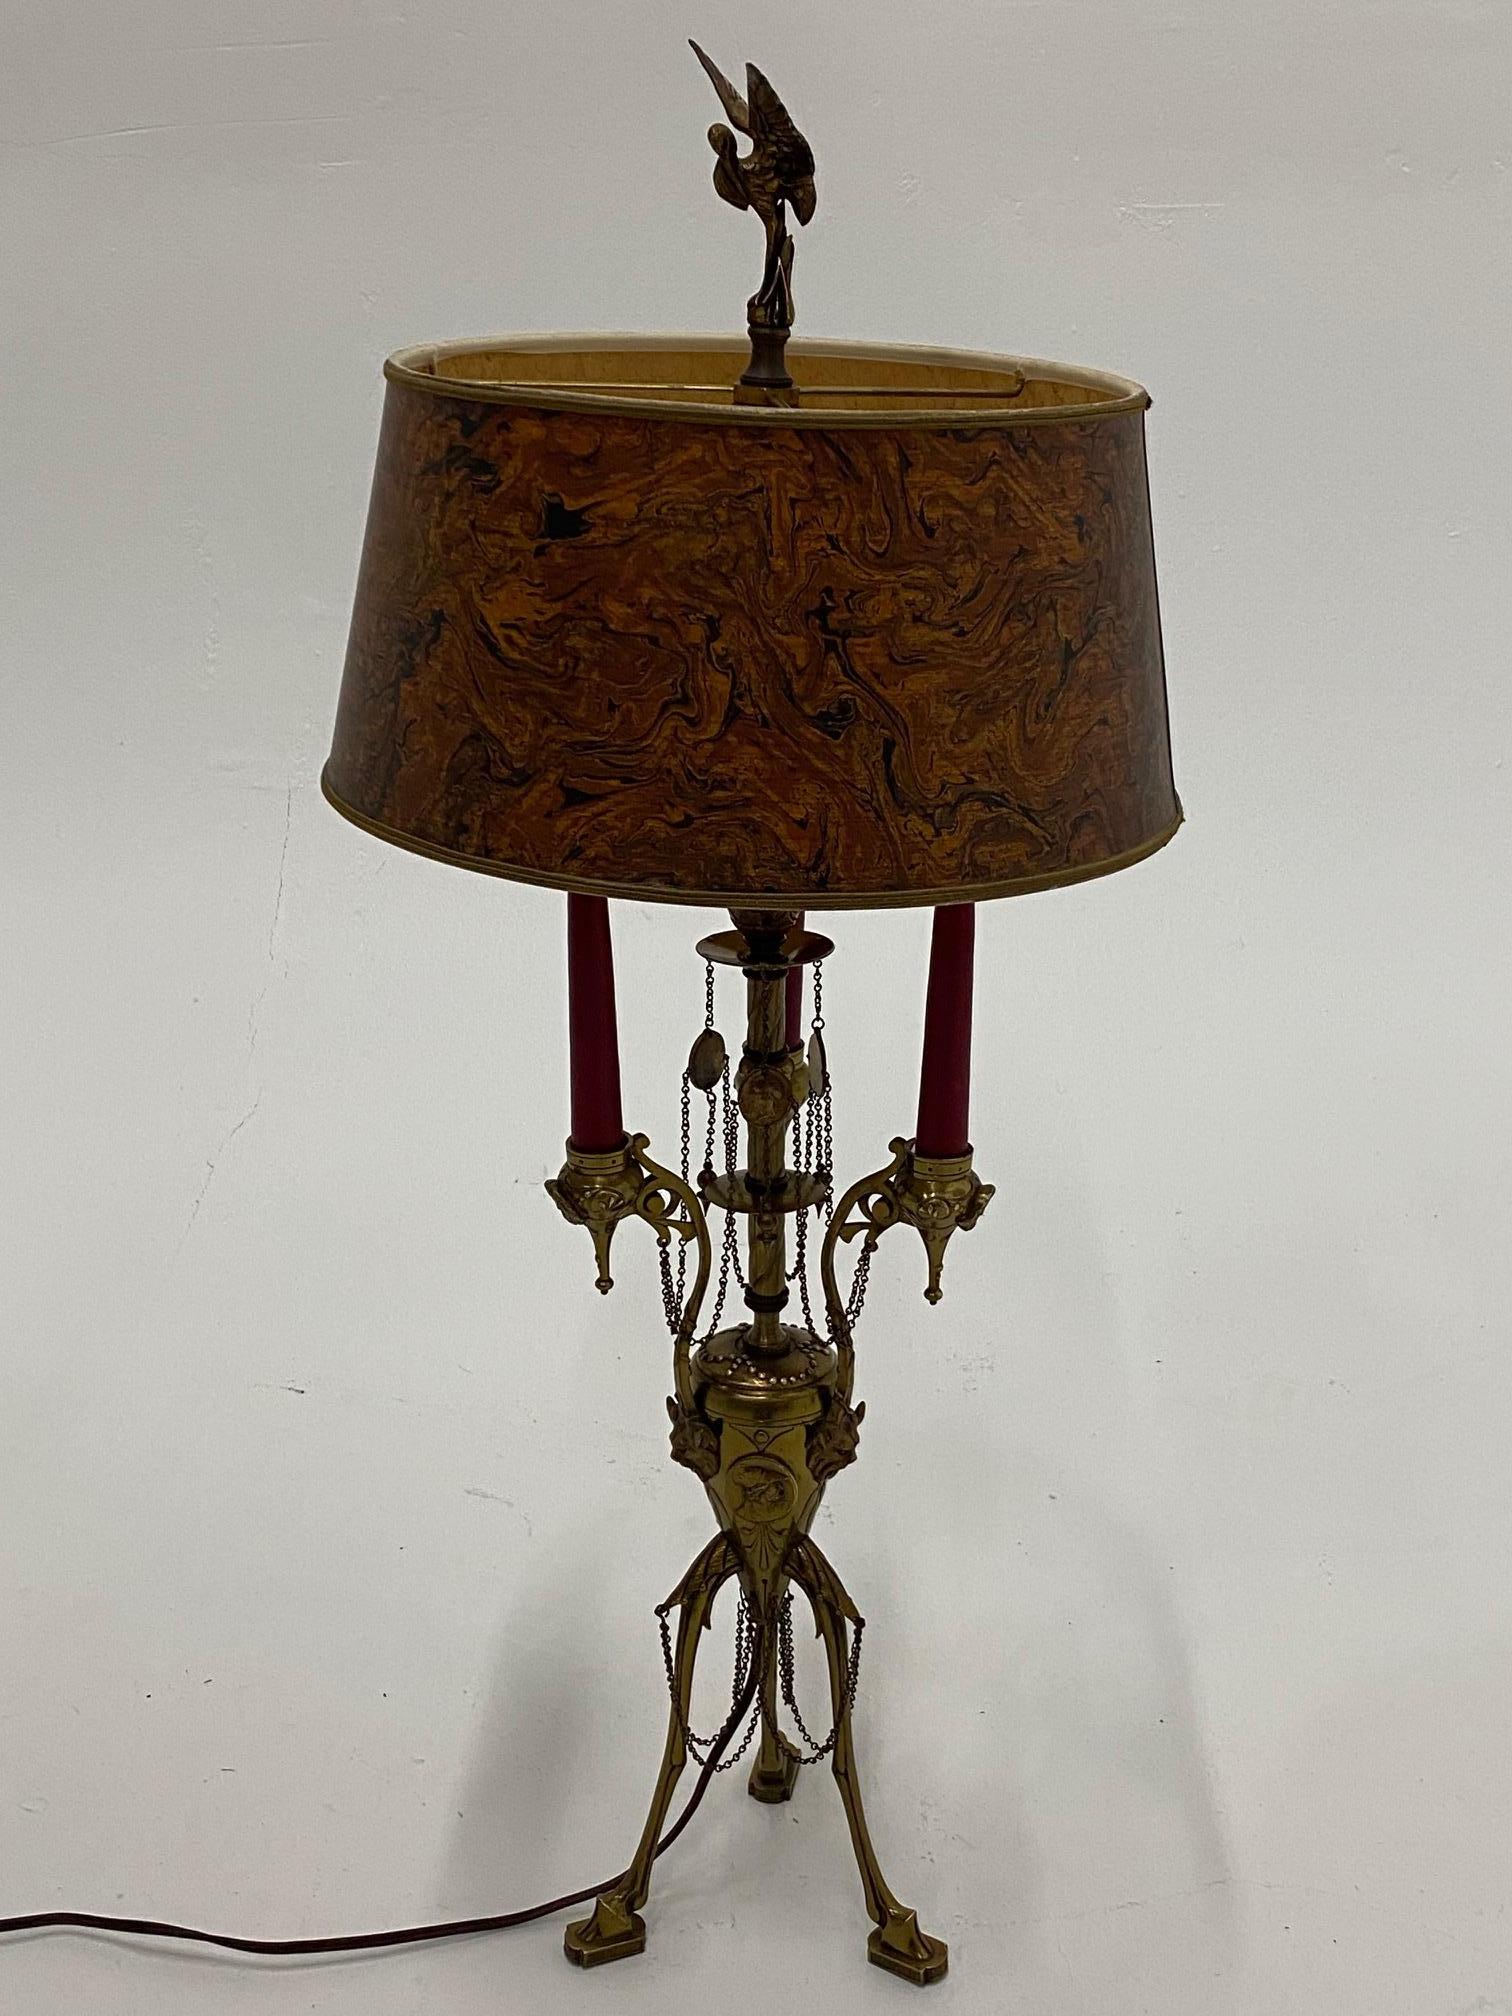 Ornate Antique Continental Neoclassical Brass Candlestick Table Lamp 1